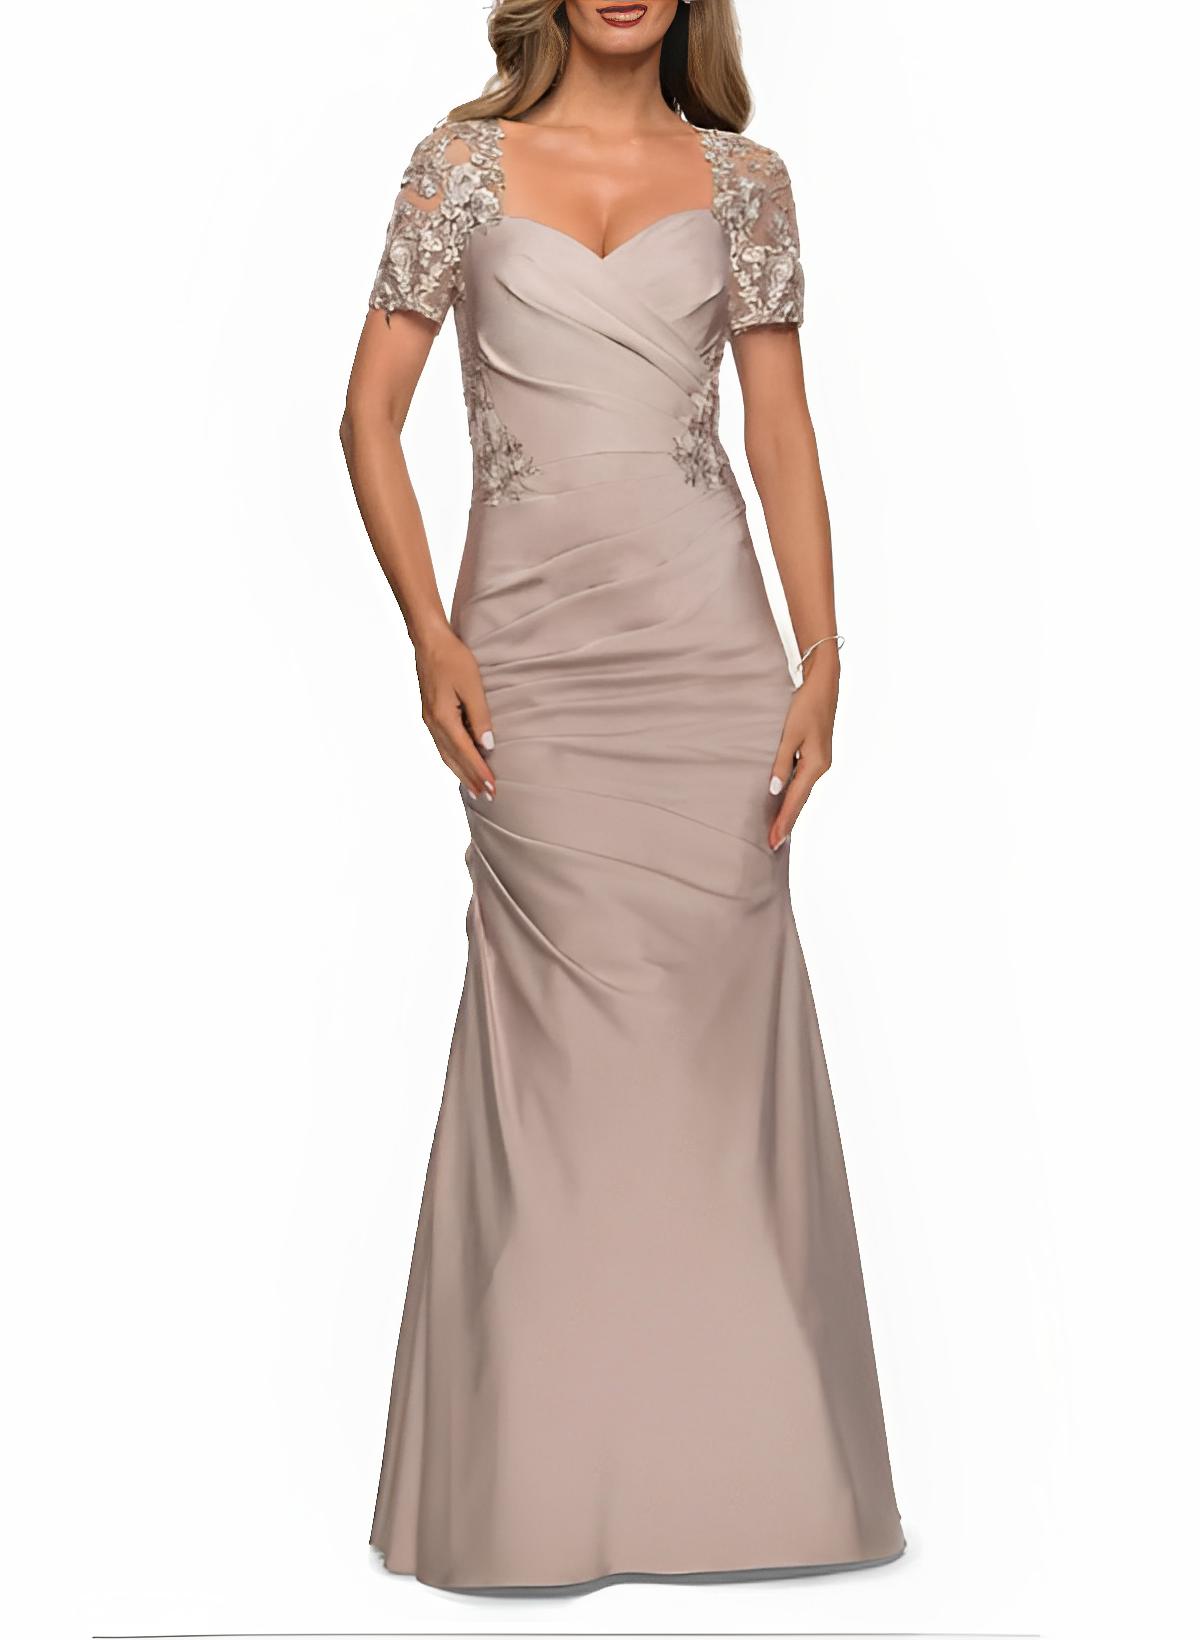 V-Neck Short Sleeves Satin Mother Of The Bride Dresses With Lace